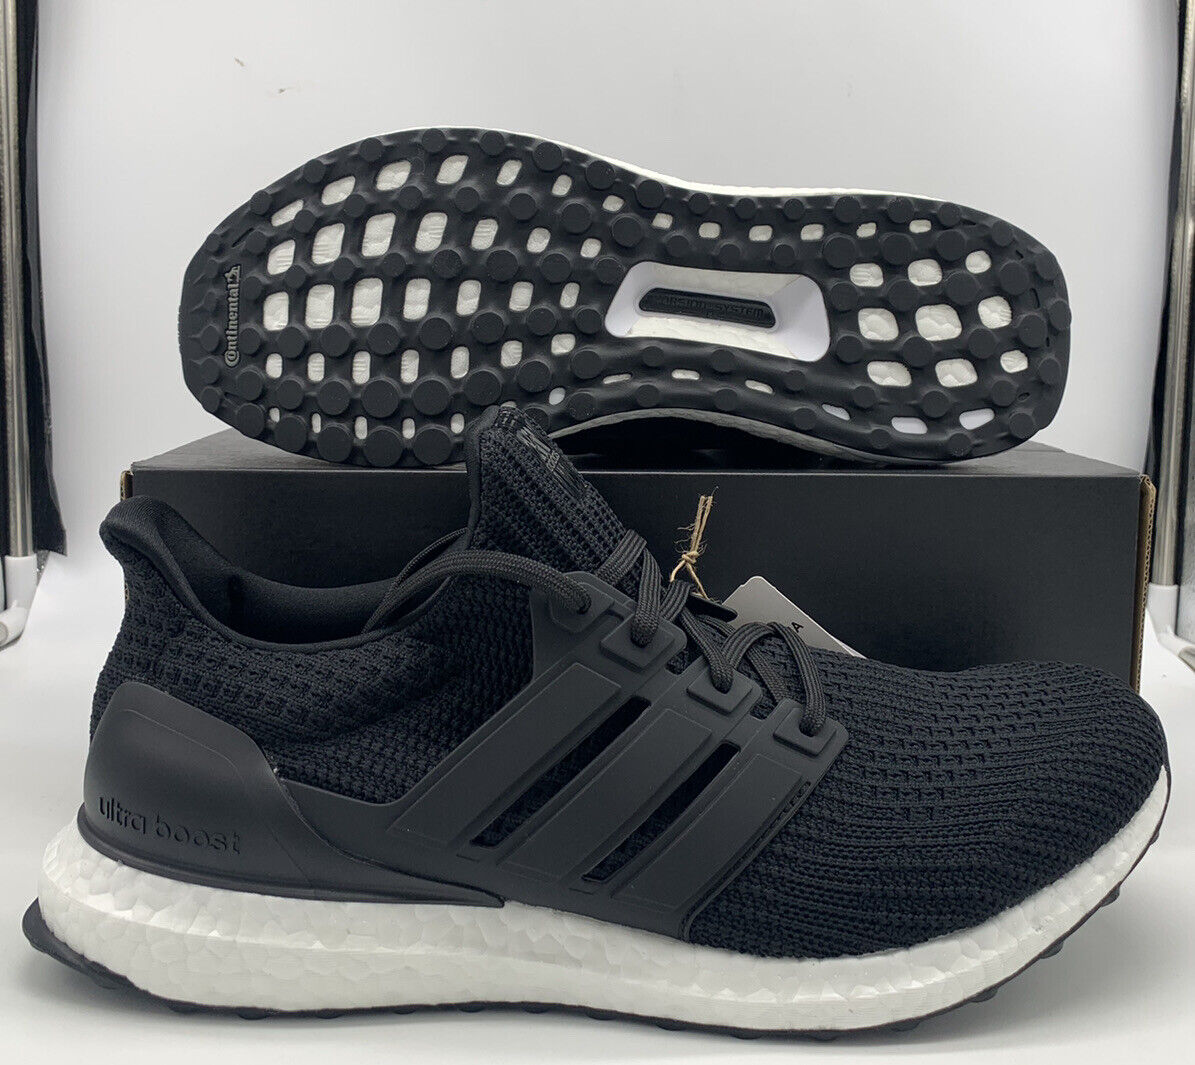 Adidas Ultraboost 4.0 Black White Running Shoes FY9318 Mens Size |